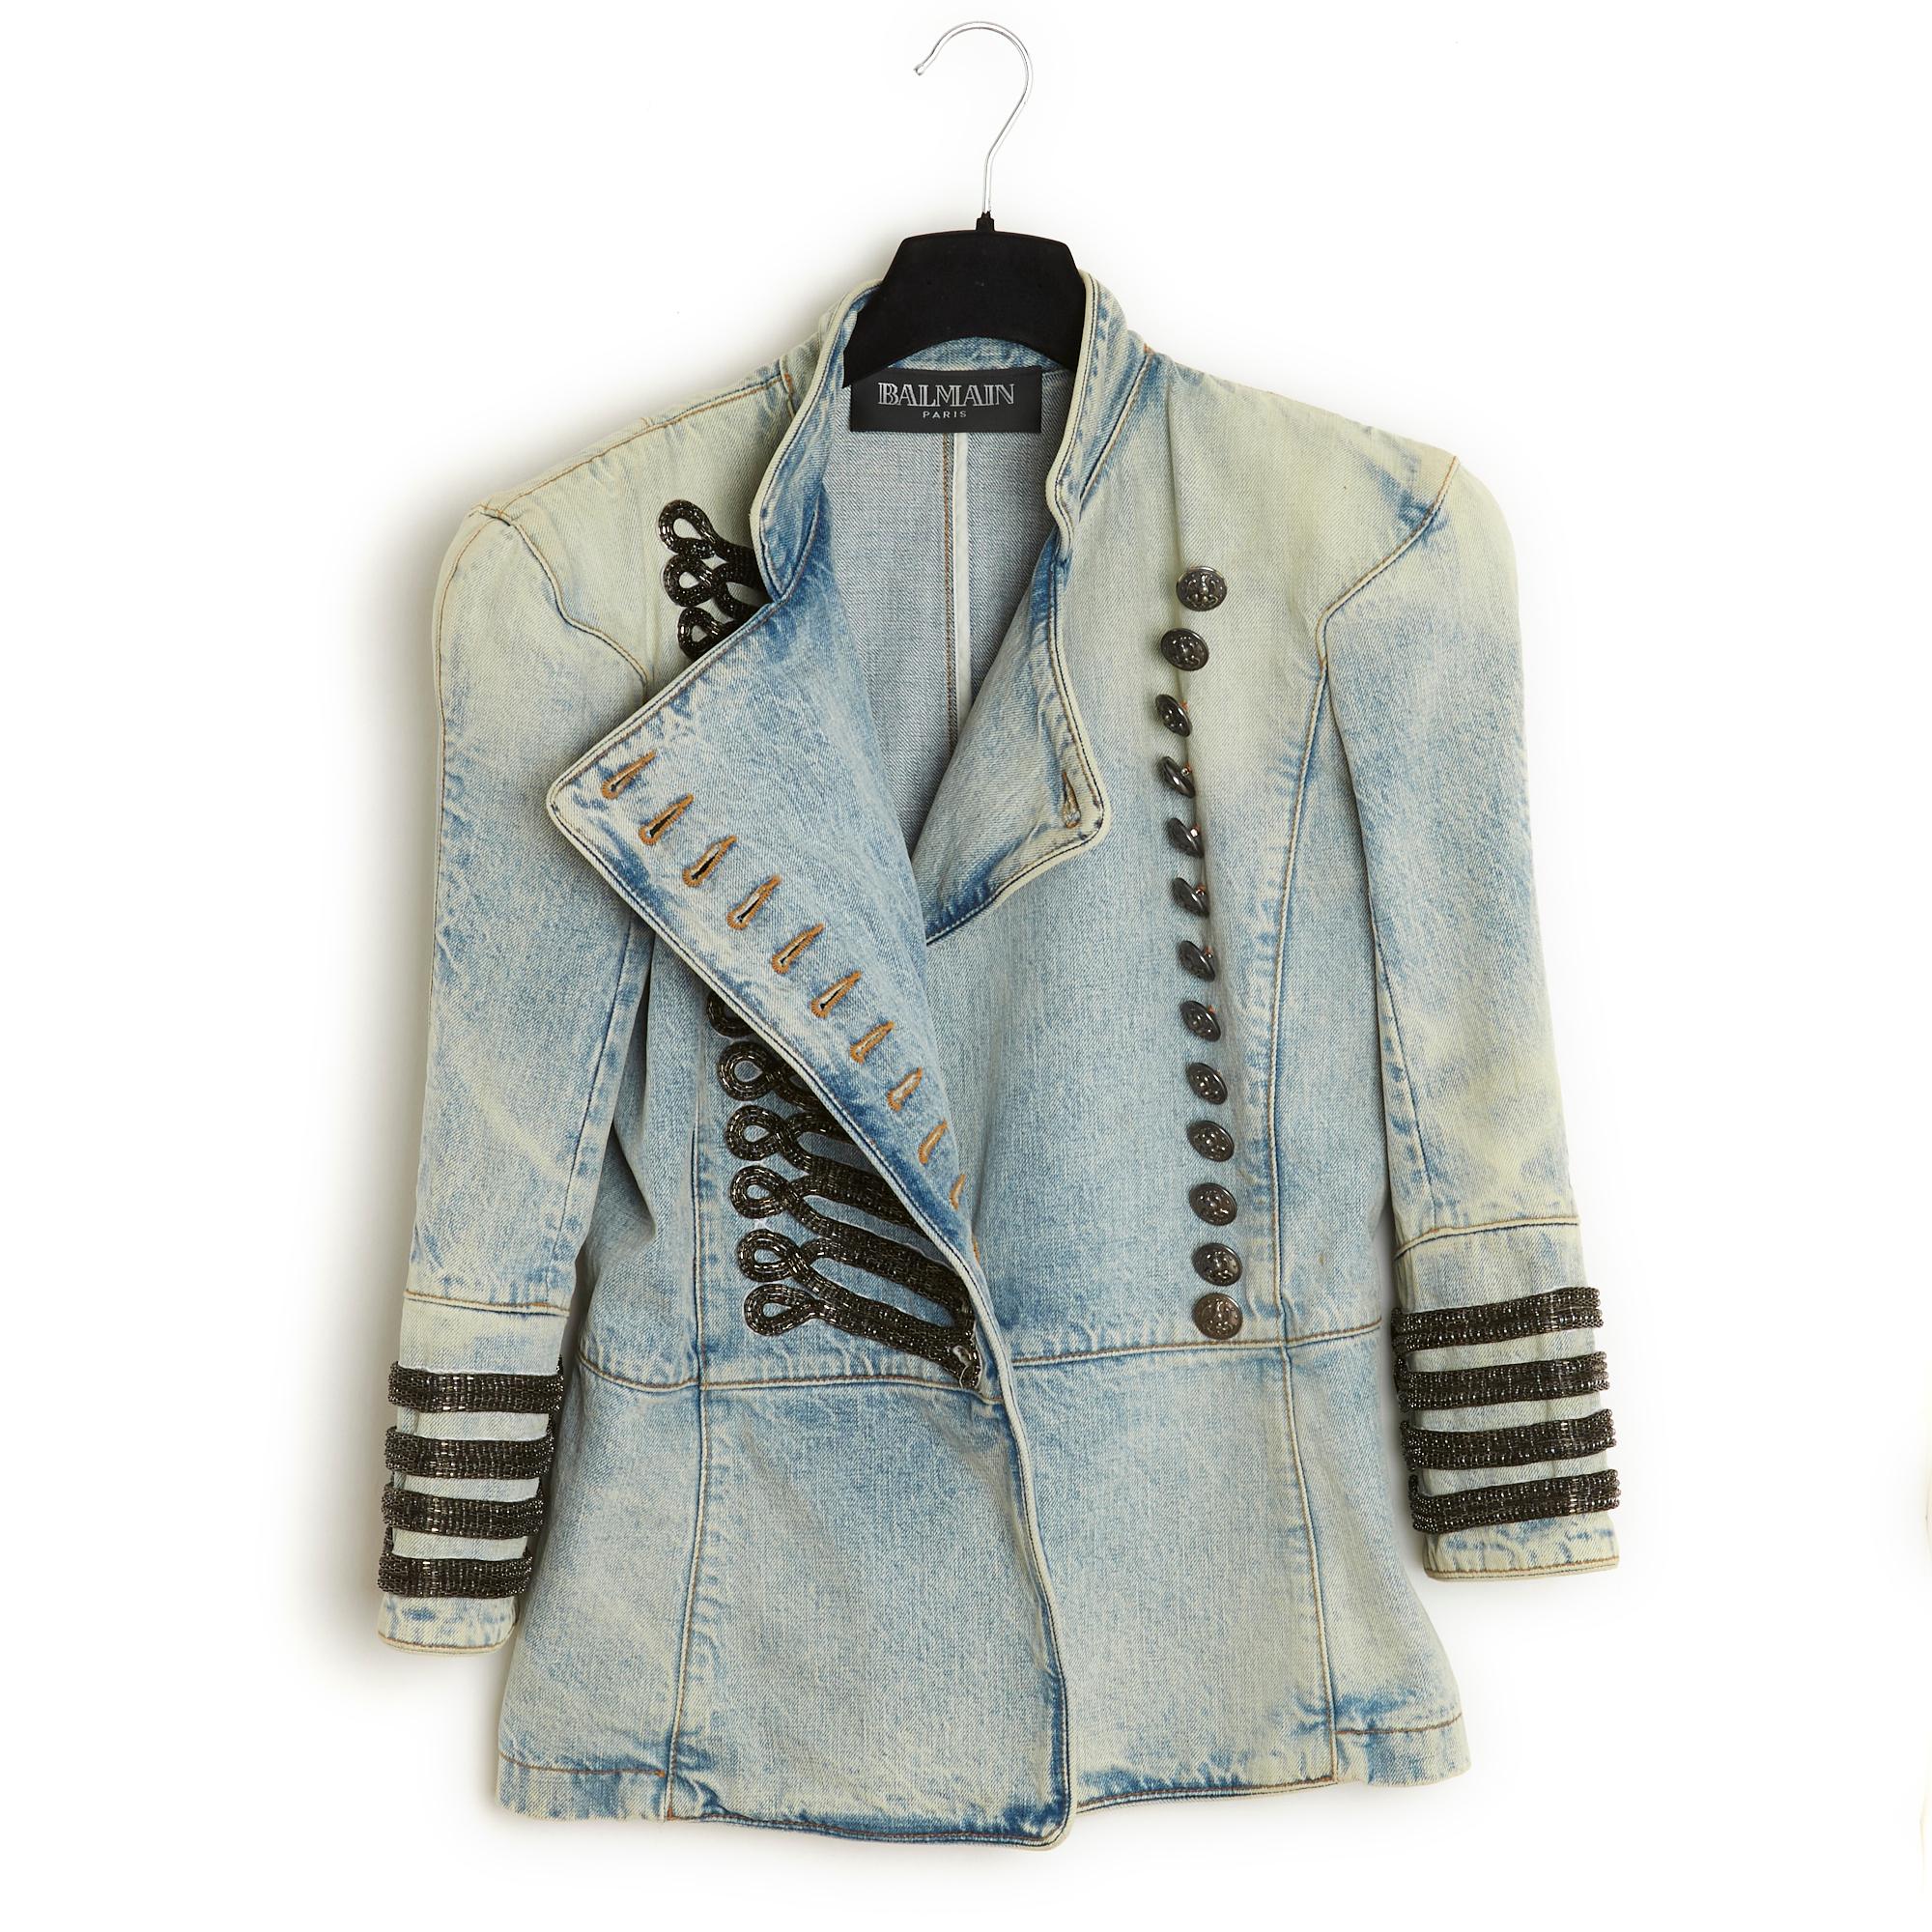 Balmain jacket SS2009 collection by Christophe Decarnin, military inspiration, in washed denim, small stand-up collar, bib decorated with blackened metal chain trimmings closed on 13 branded buttons, shoulder pads, 2/3 slit sleeves decorated with